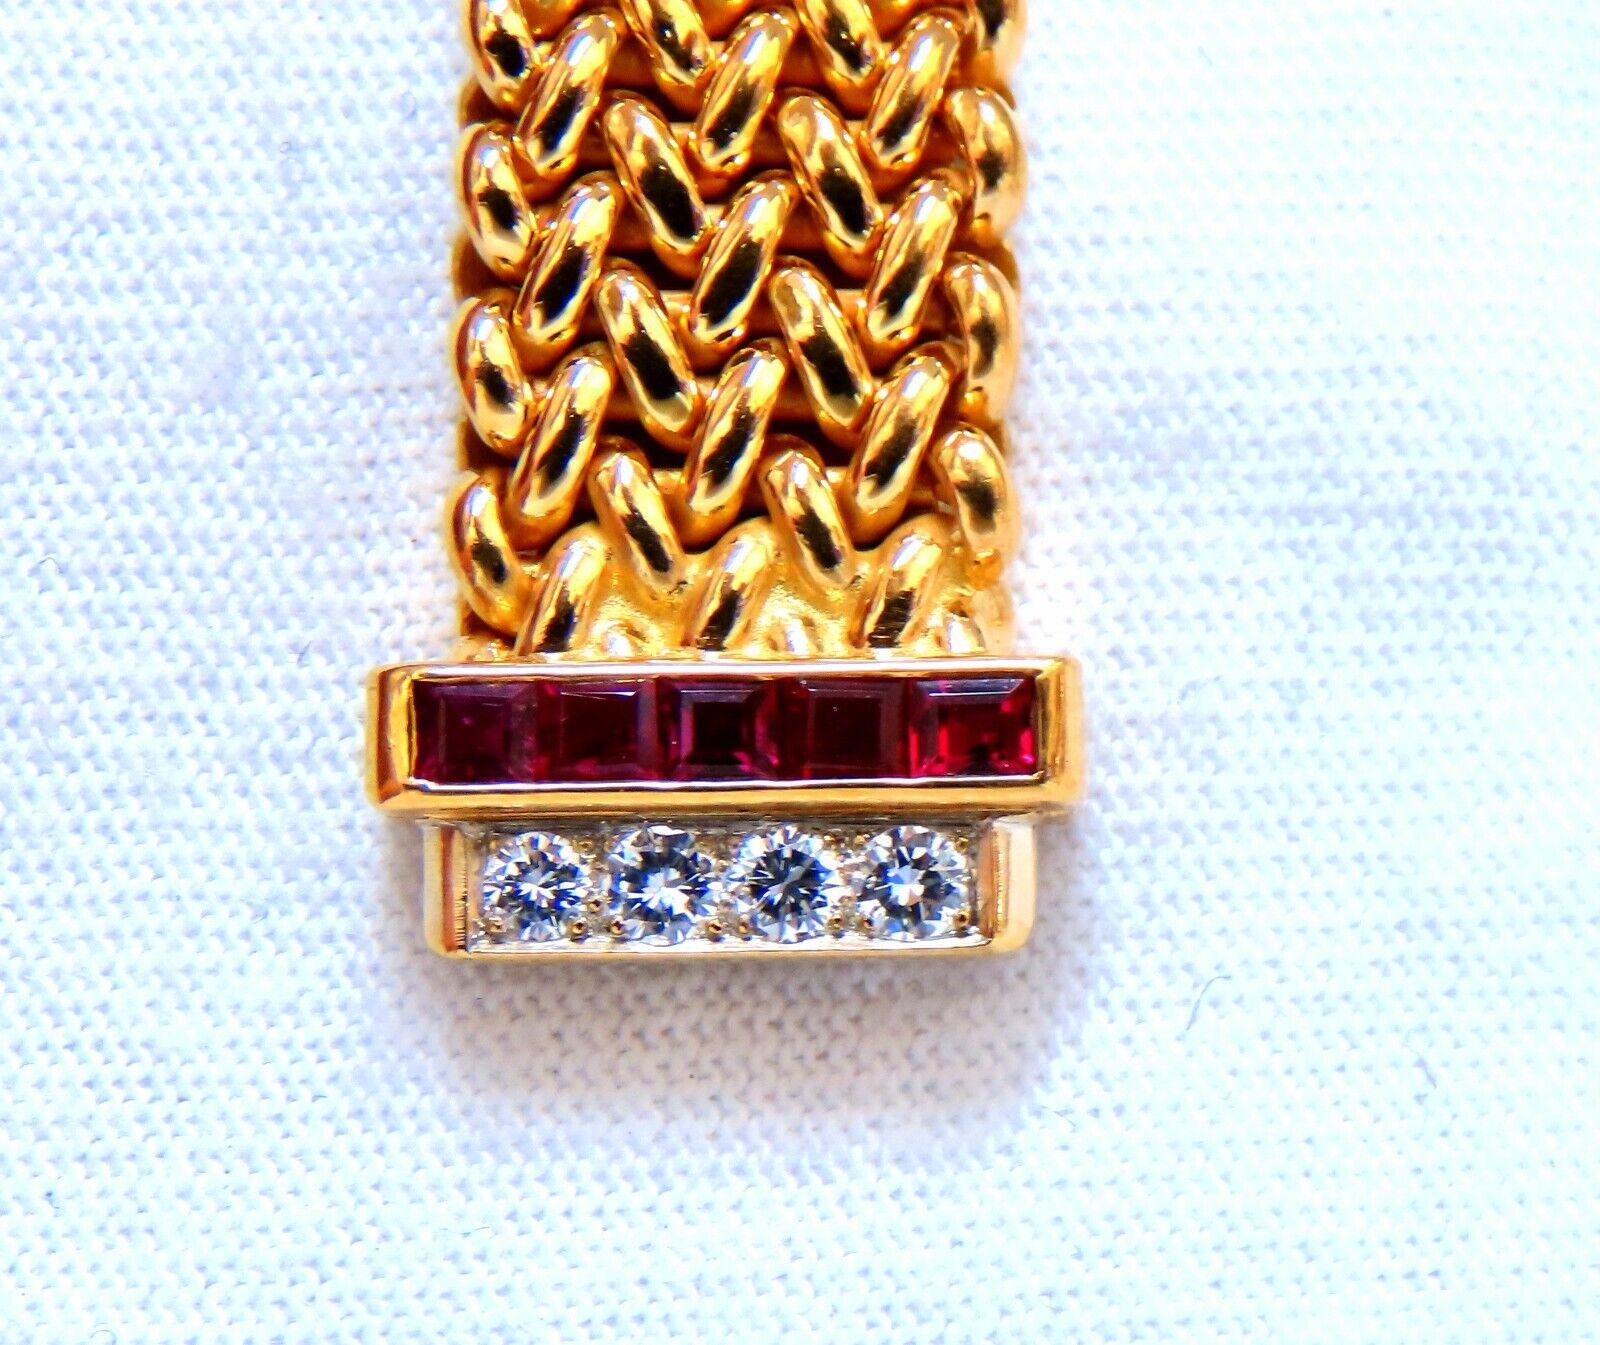 Cable Tight Ribbon Flat

.50ct Natural Emerald cut Ruby necklace.

.50ct. Natural Round diamonds.

G-color Vs-2 clarity.

Baguette & full cuts, Classic blood red Rubies

14kt. Yellow gold

105 grams 

$24,000 appraisal will accompany

15 inches =